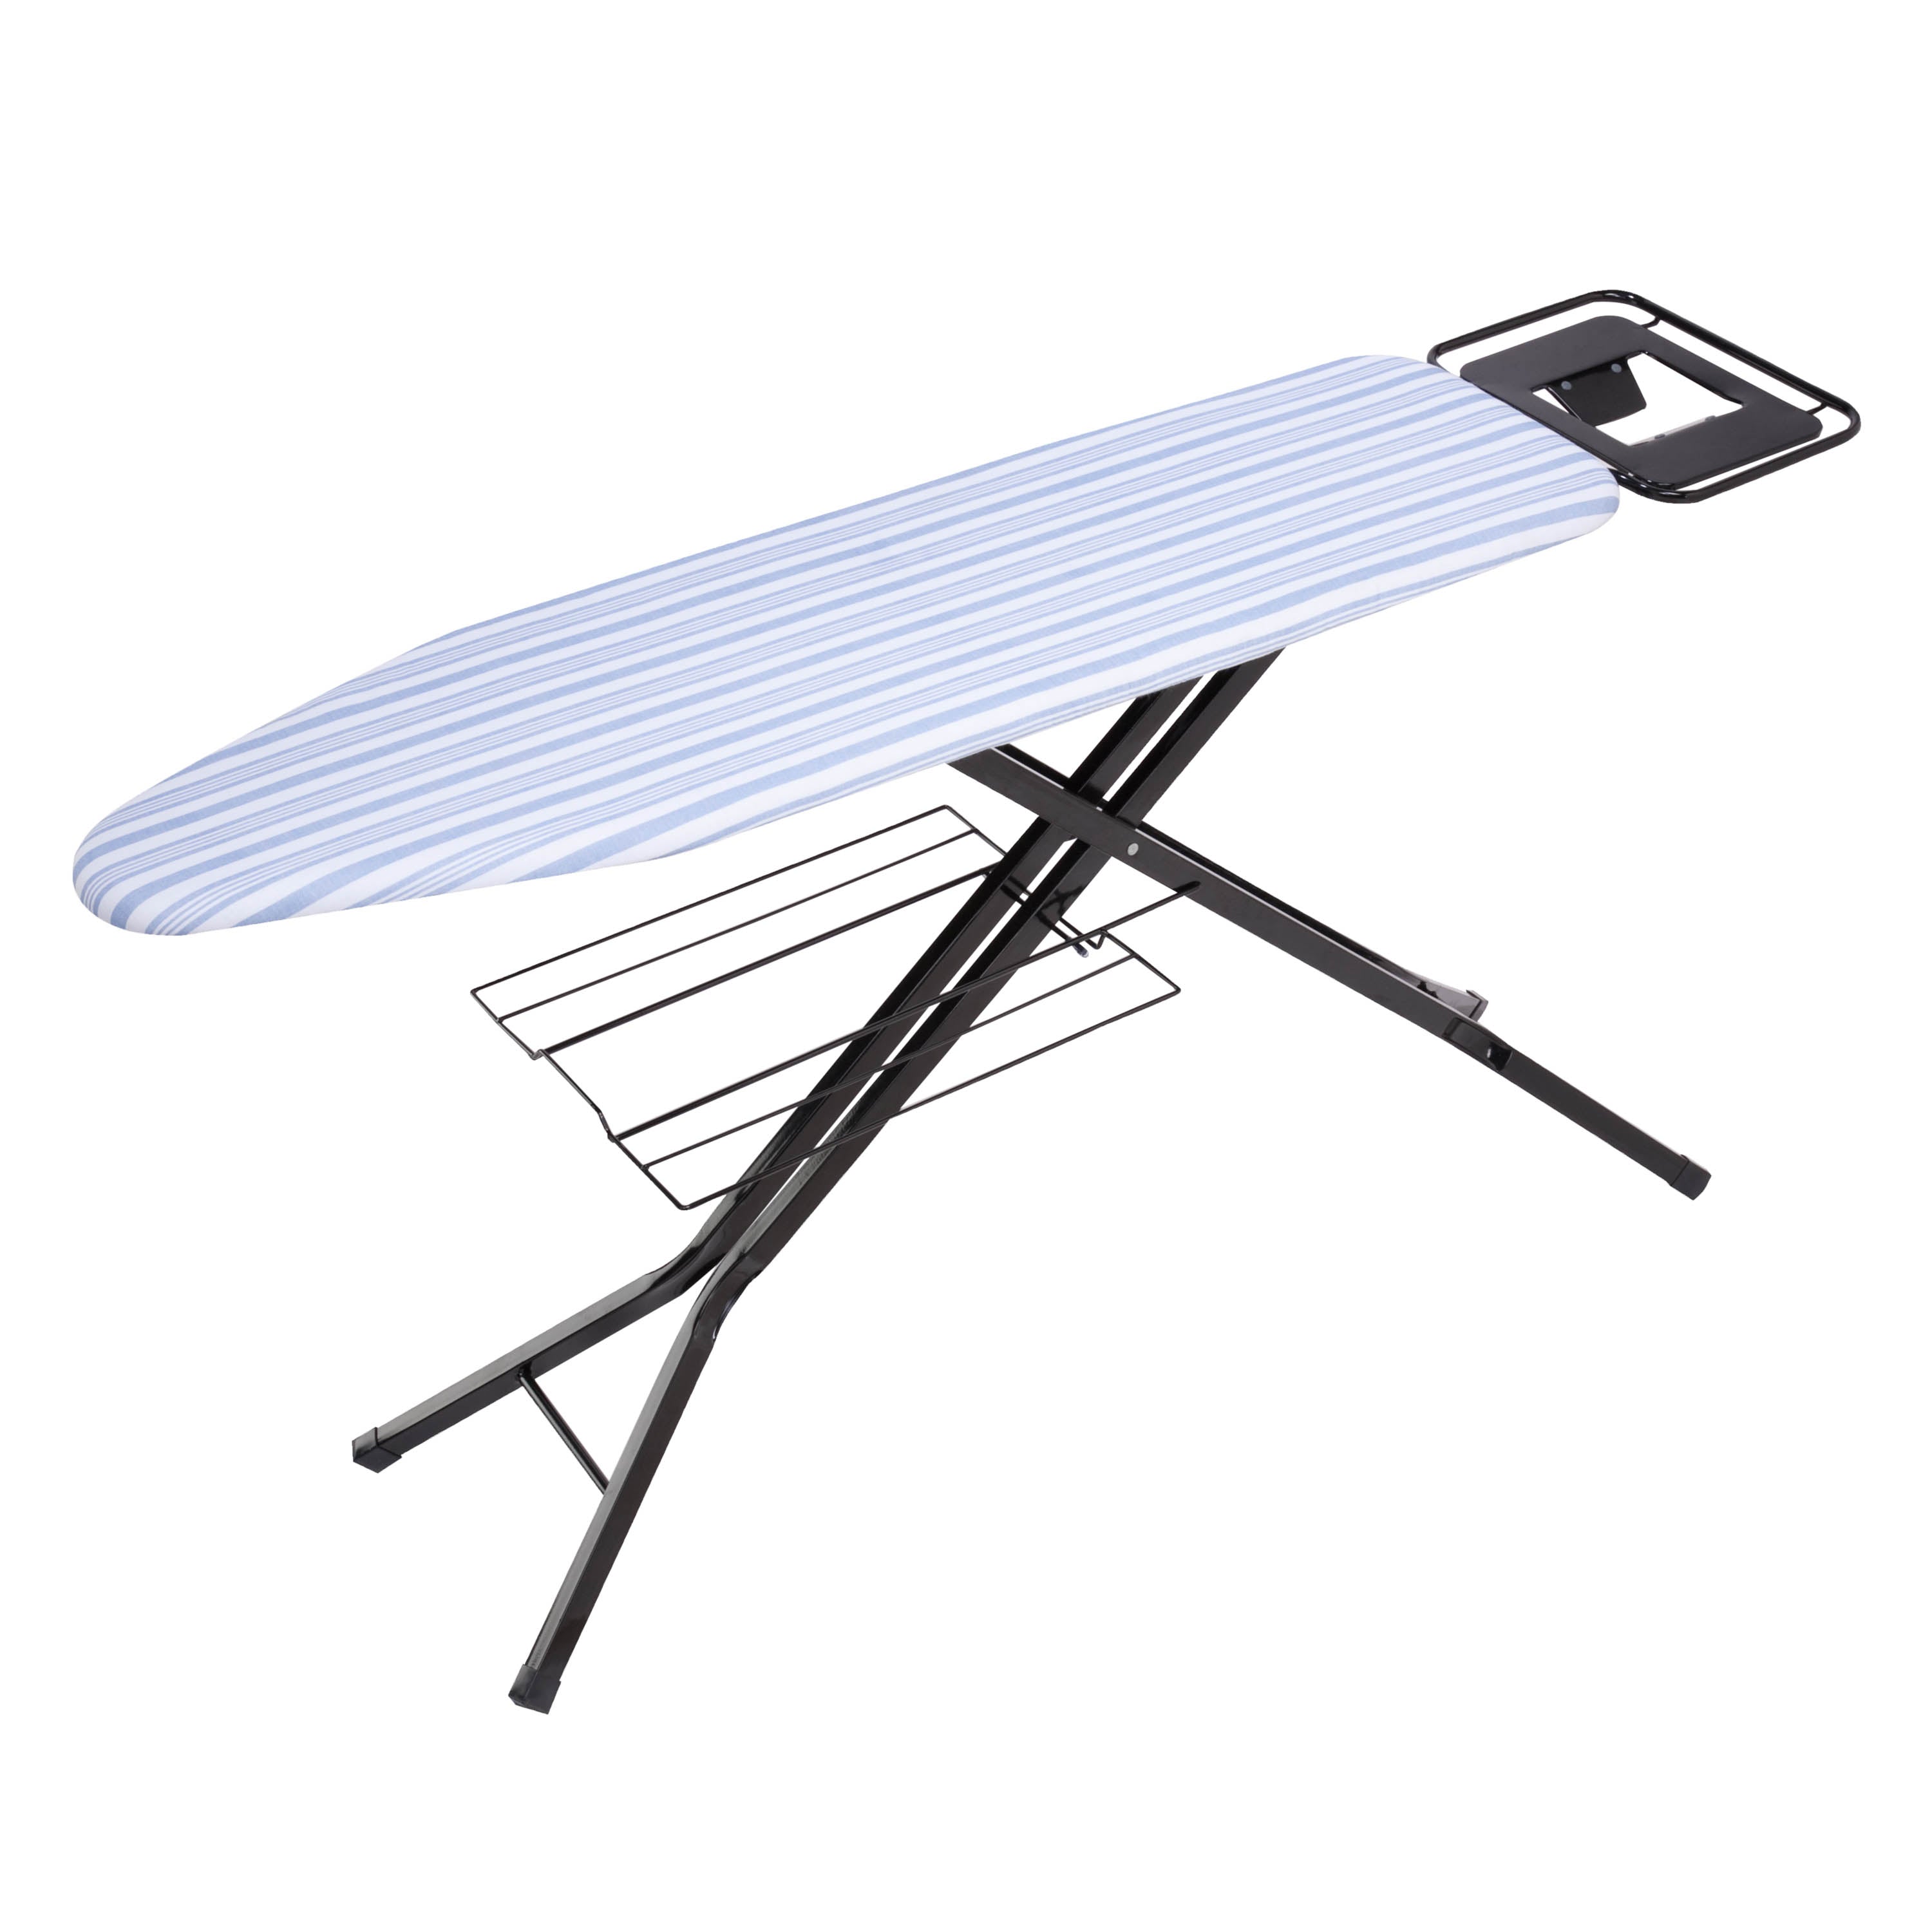 Household Essentials Deluxe Ironing Board Cover and Pad - Blue